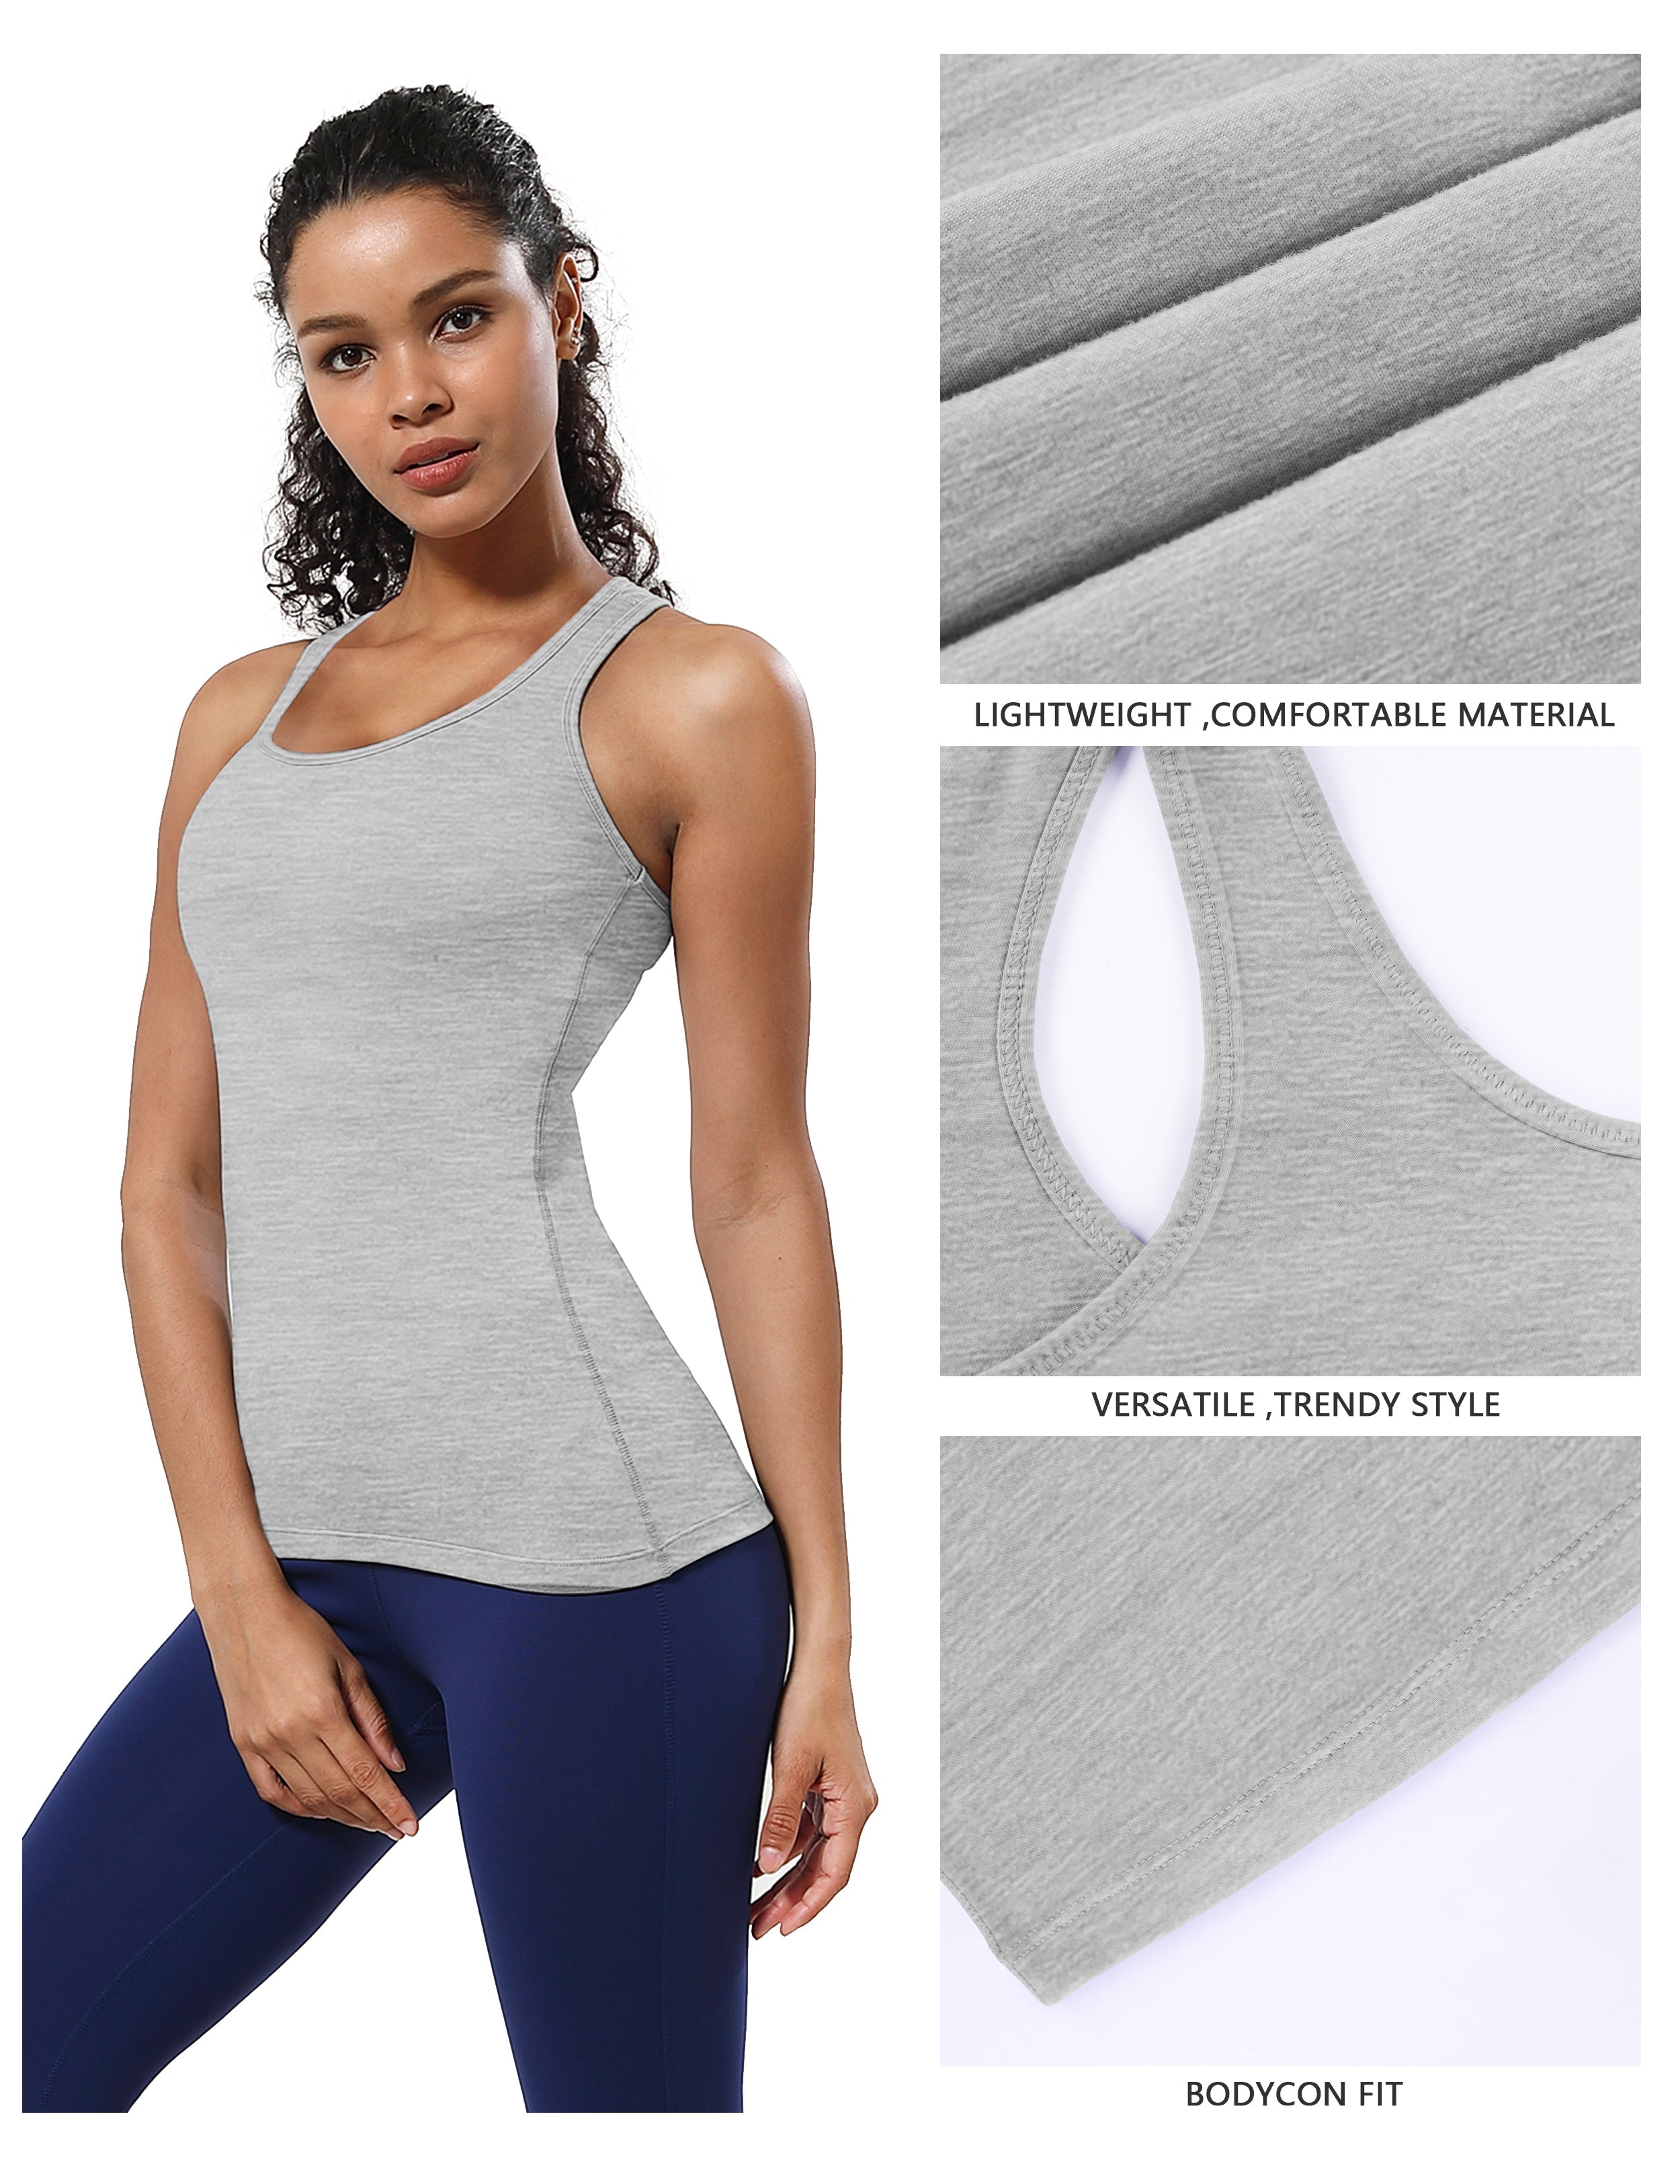 Racerback Athletic Tank Tops heathergray 92%Nylon/8%Spandex(Cotton Soft) Designed for Tall Size Tight Fit So buttery soft, it feels weightless Sweat-wicking Four-way stretch Breathable Contours your body Sits below the waistband for moderate, everyday coverage